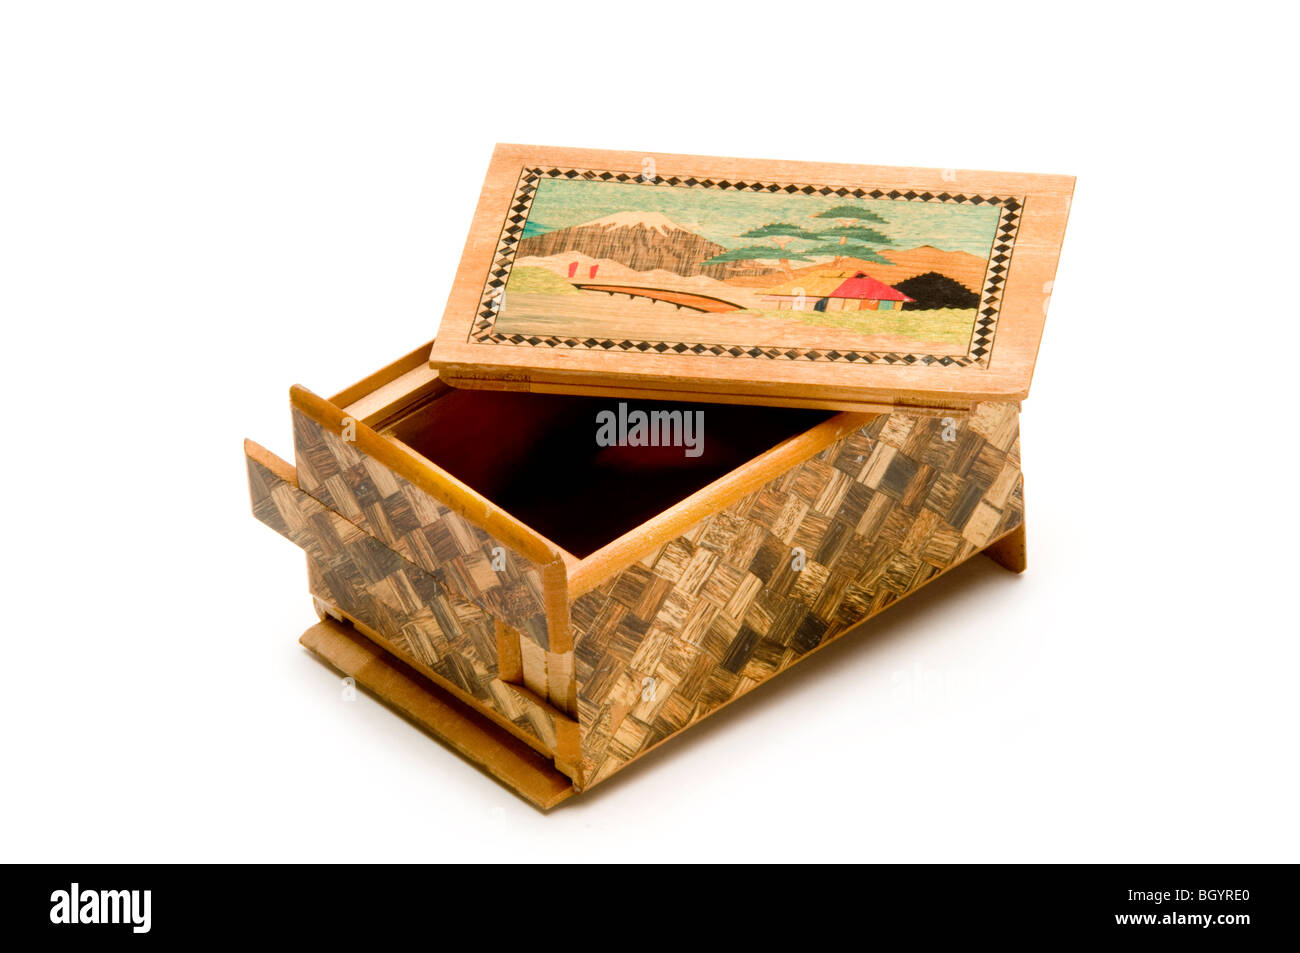 chinese wooden puzzle box Stock Photo